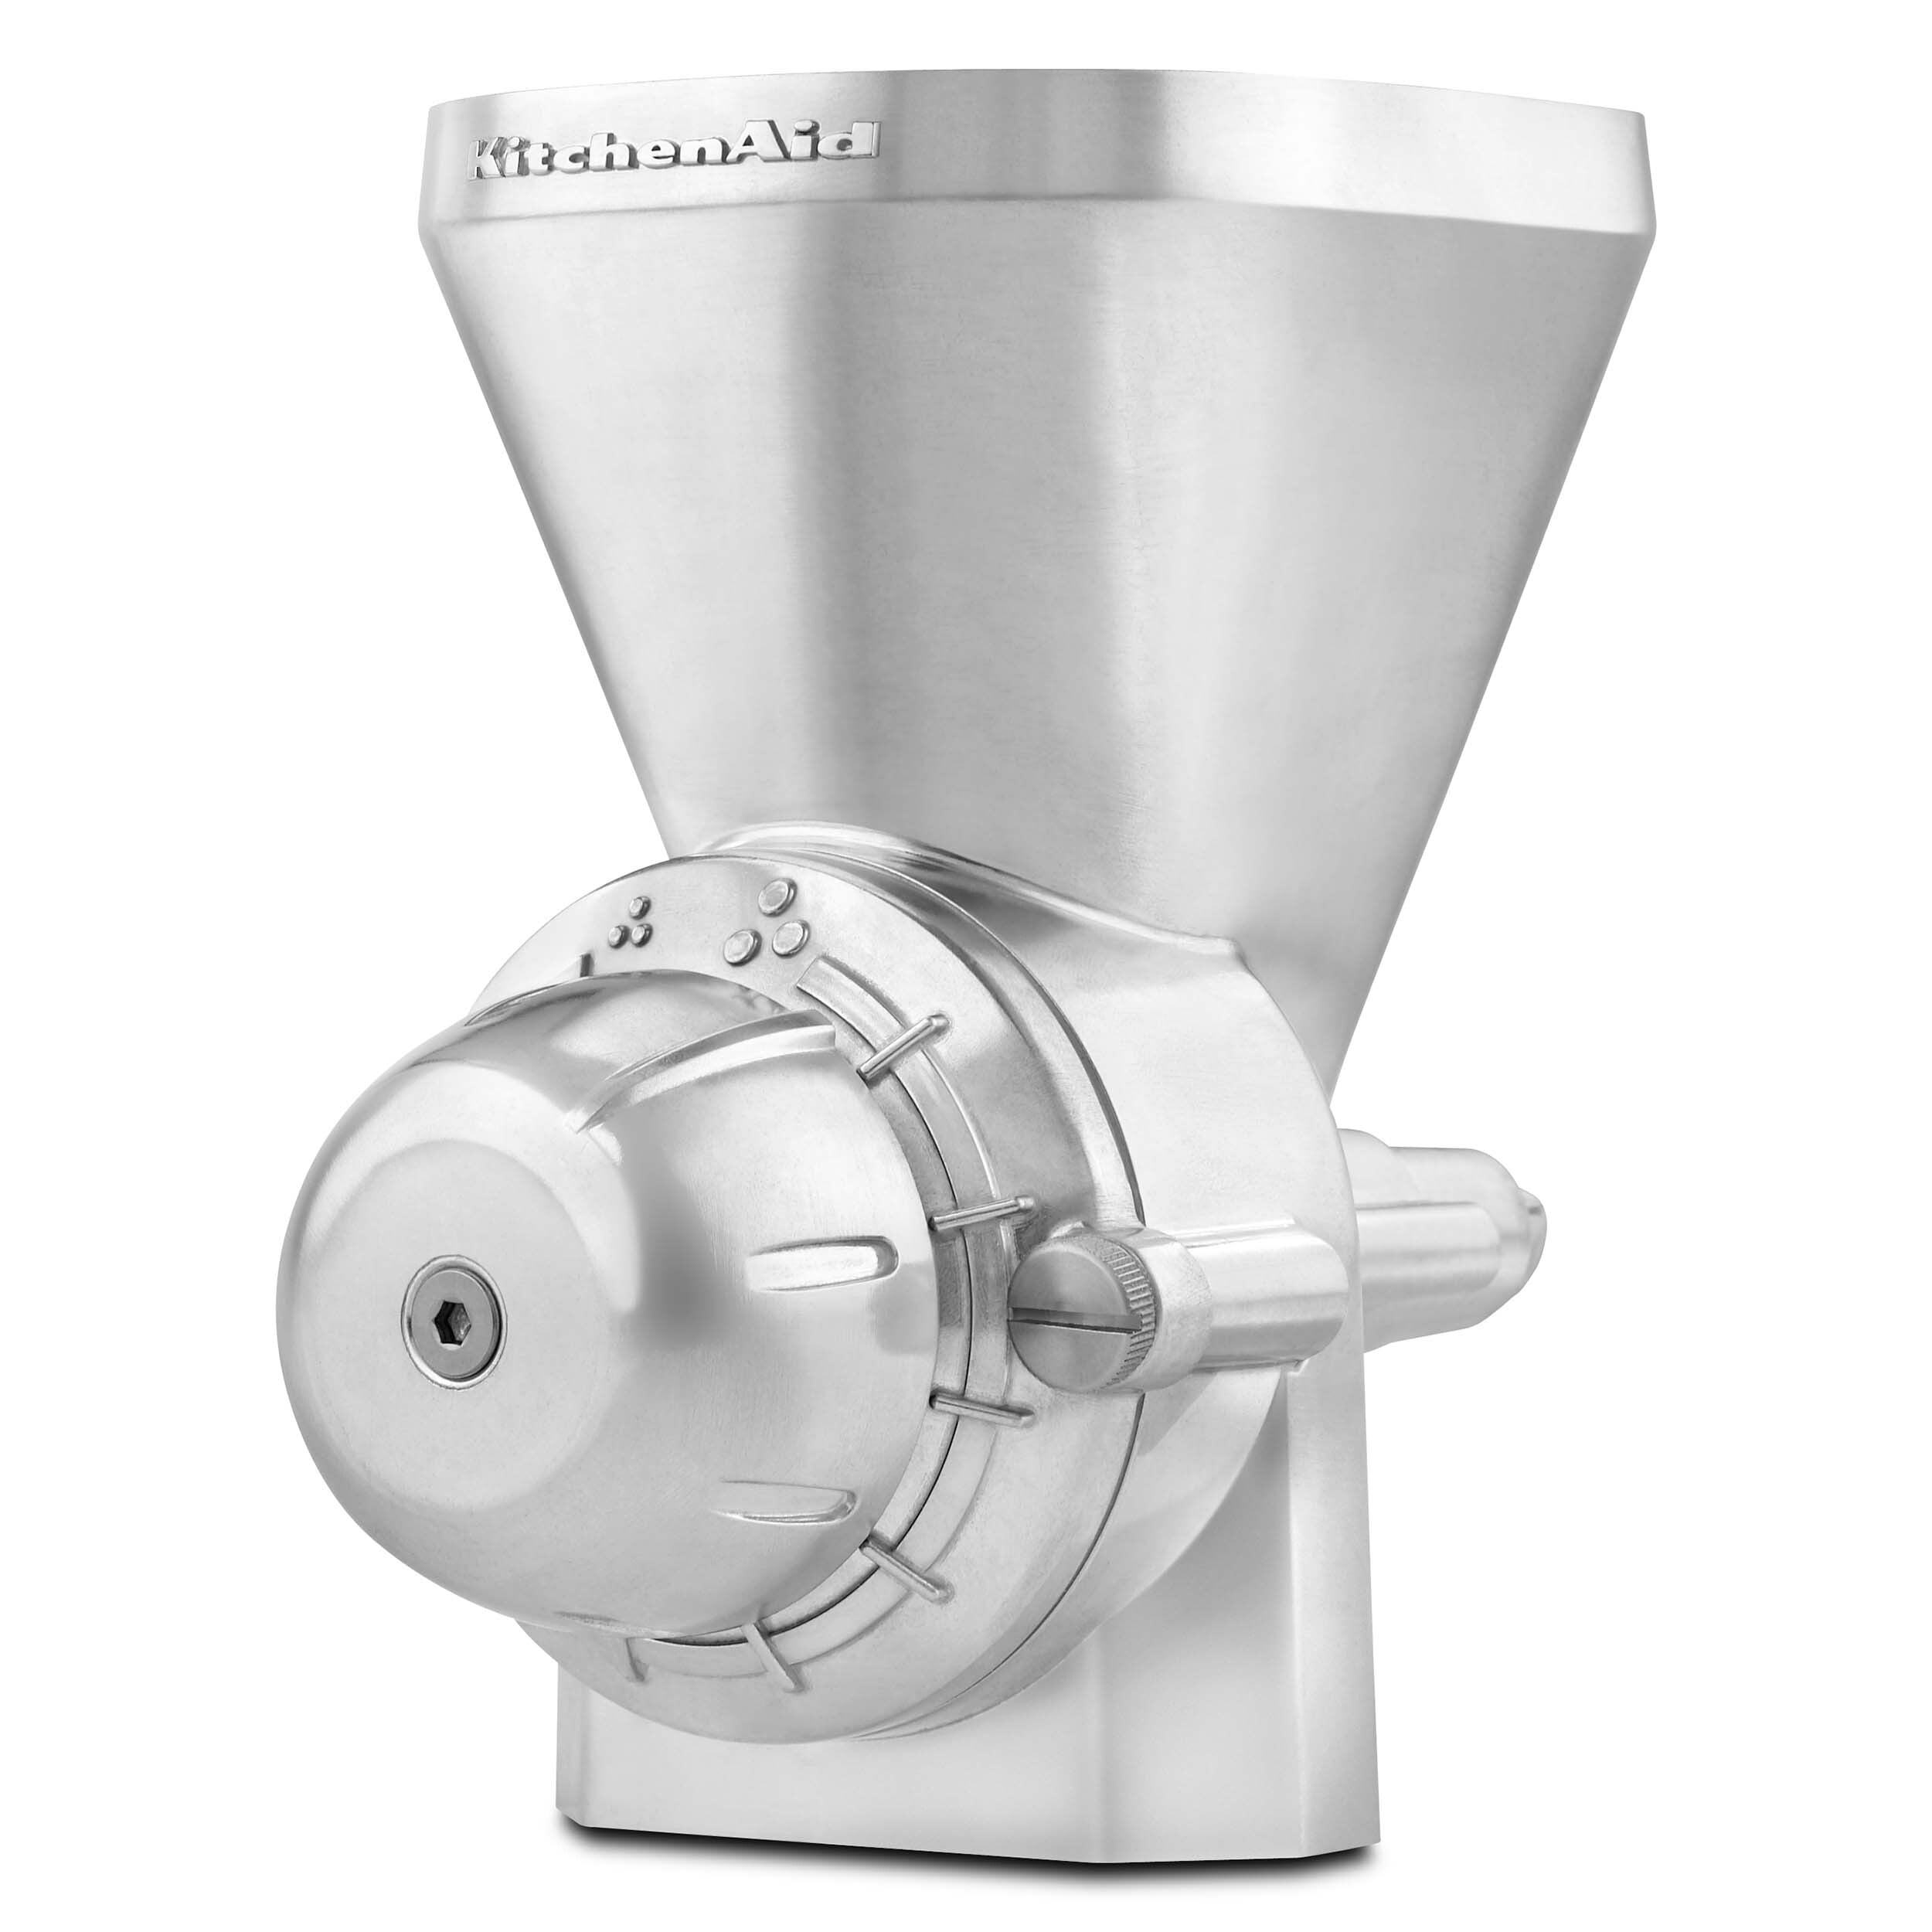  Family Grain Mill Grain Grinder Attachment for Saving Counter  Space - Acts as a Corn Grinder, Flour Mill for Oily Seeds, Wheat Grinder,  Coffee Grinder - Grain Mill Attachment for KitchenAid